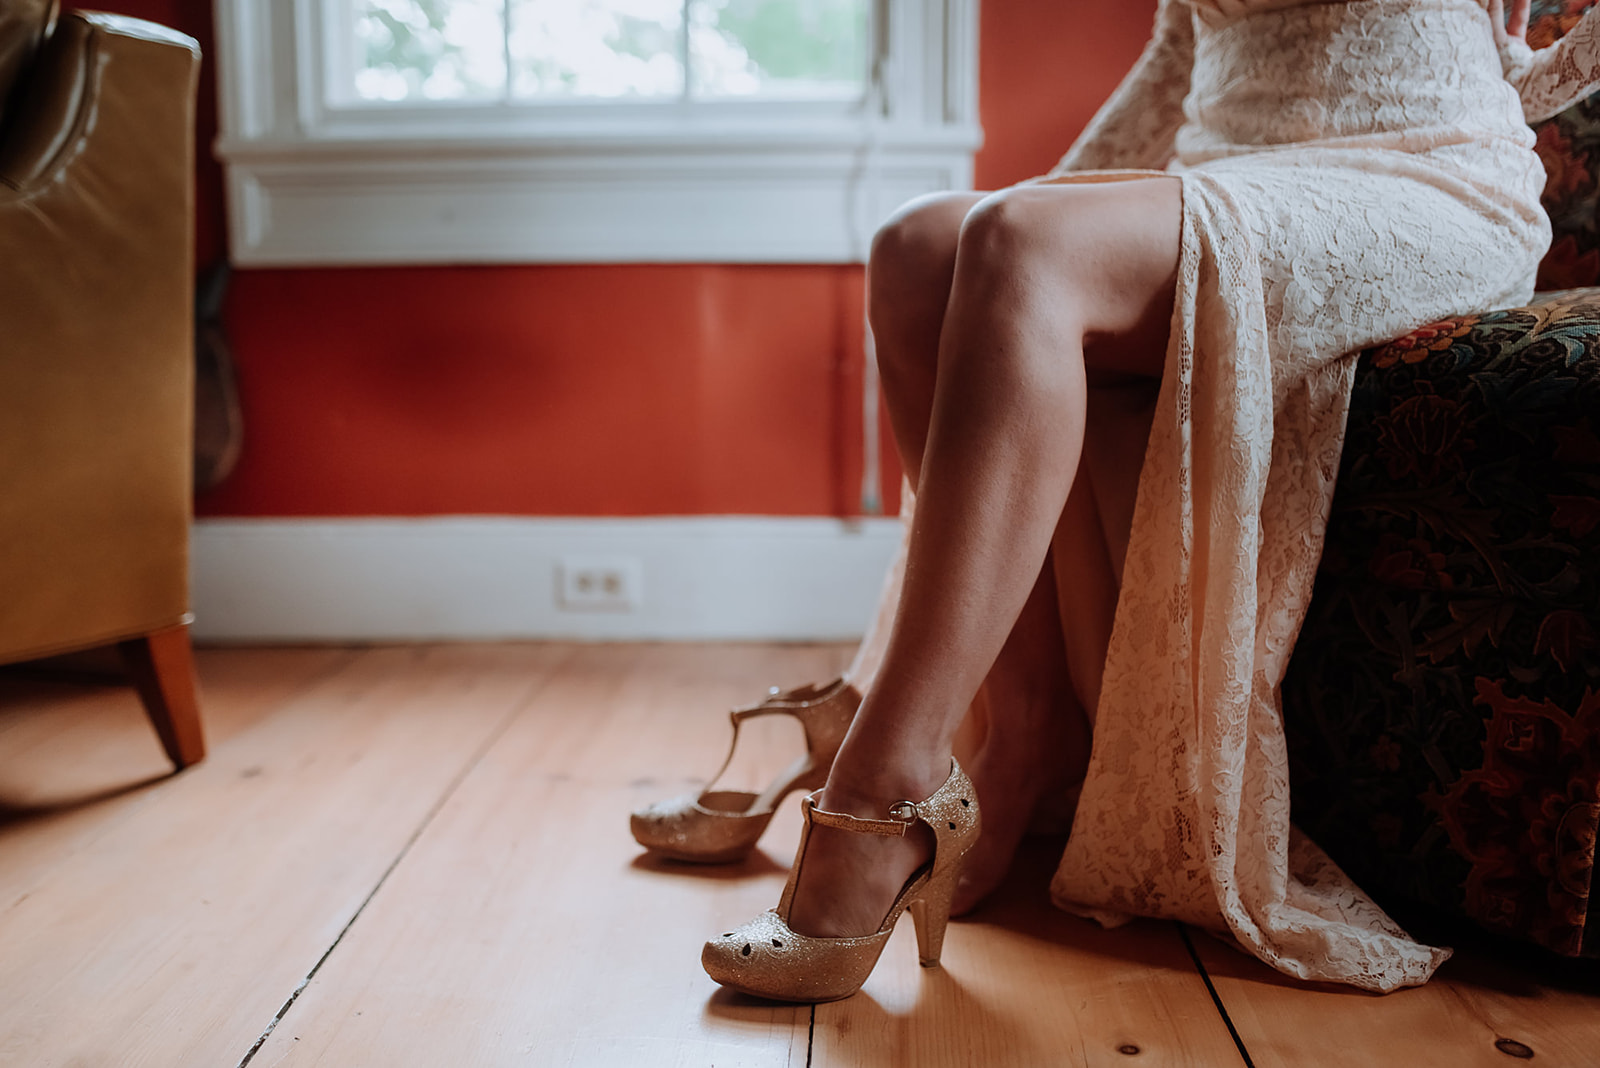 Close up of Bride's legs as she slides her foot into her ankle strap high heels.